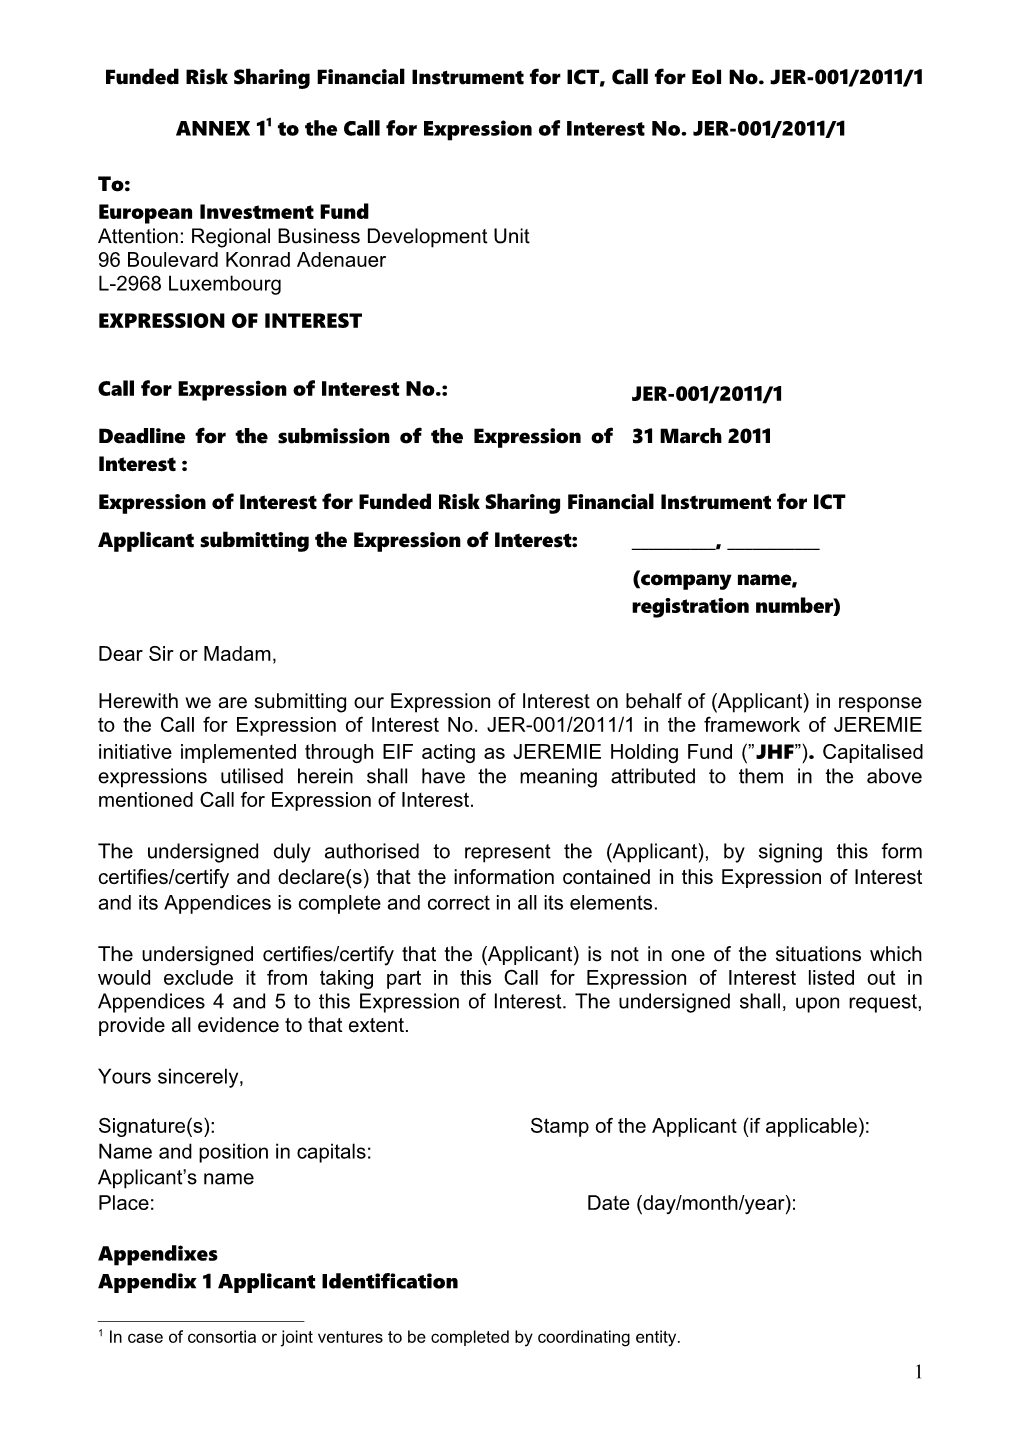 ANNEX 1 to the Call for Expression of Interest No